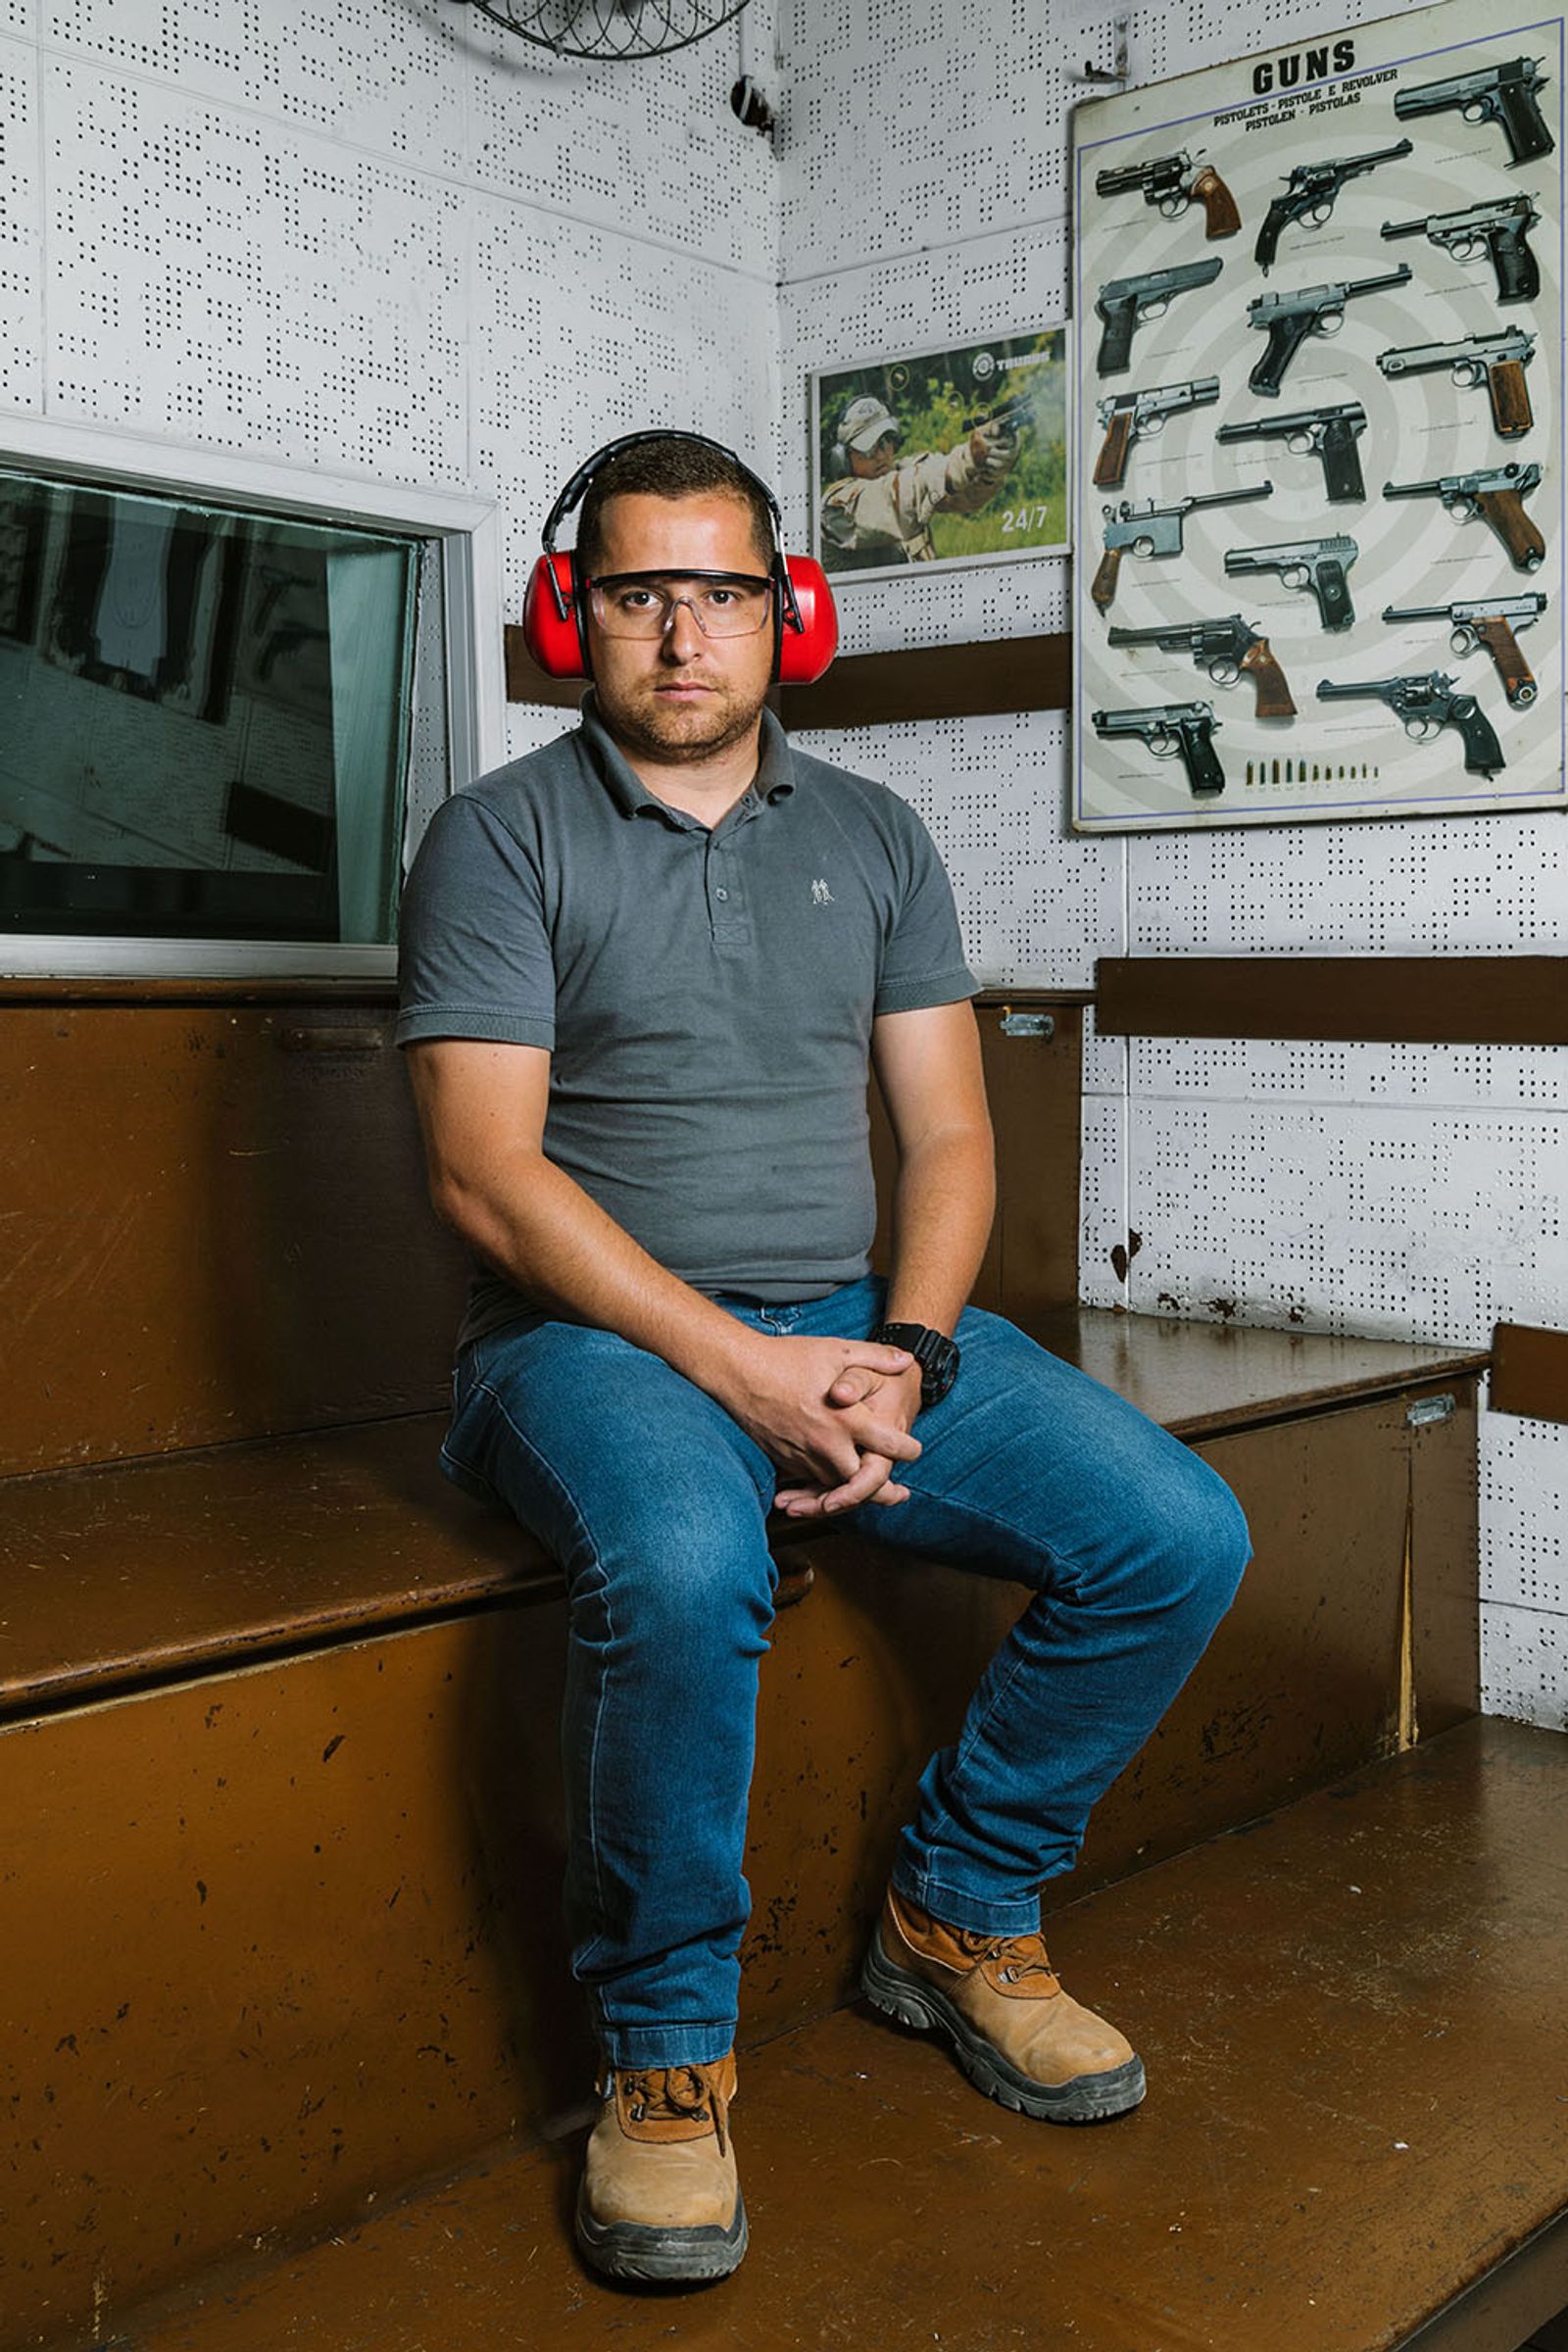 © Gabriel Carpes - Sérgio, former Workers Party supporter at a local Gun Range